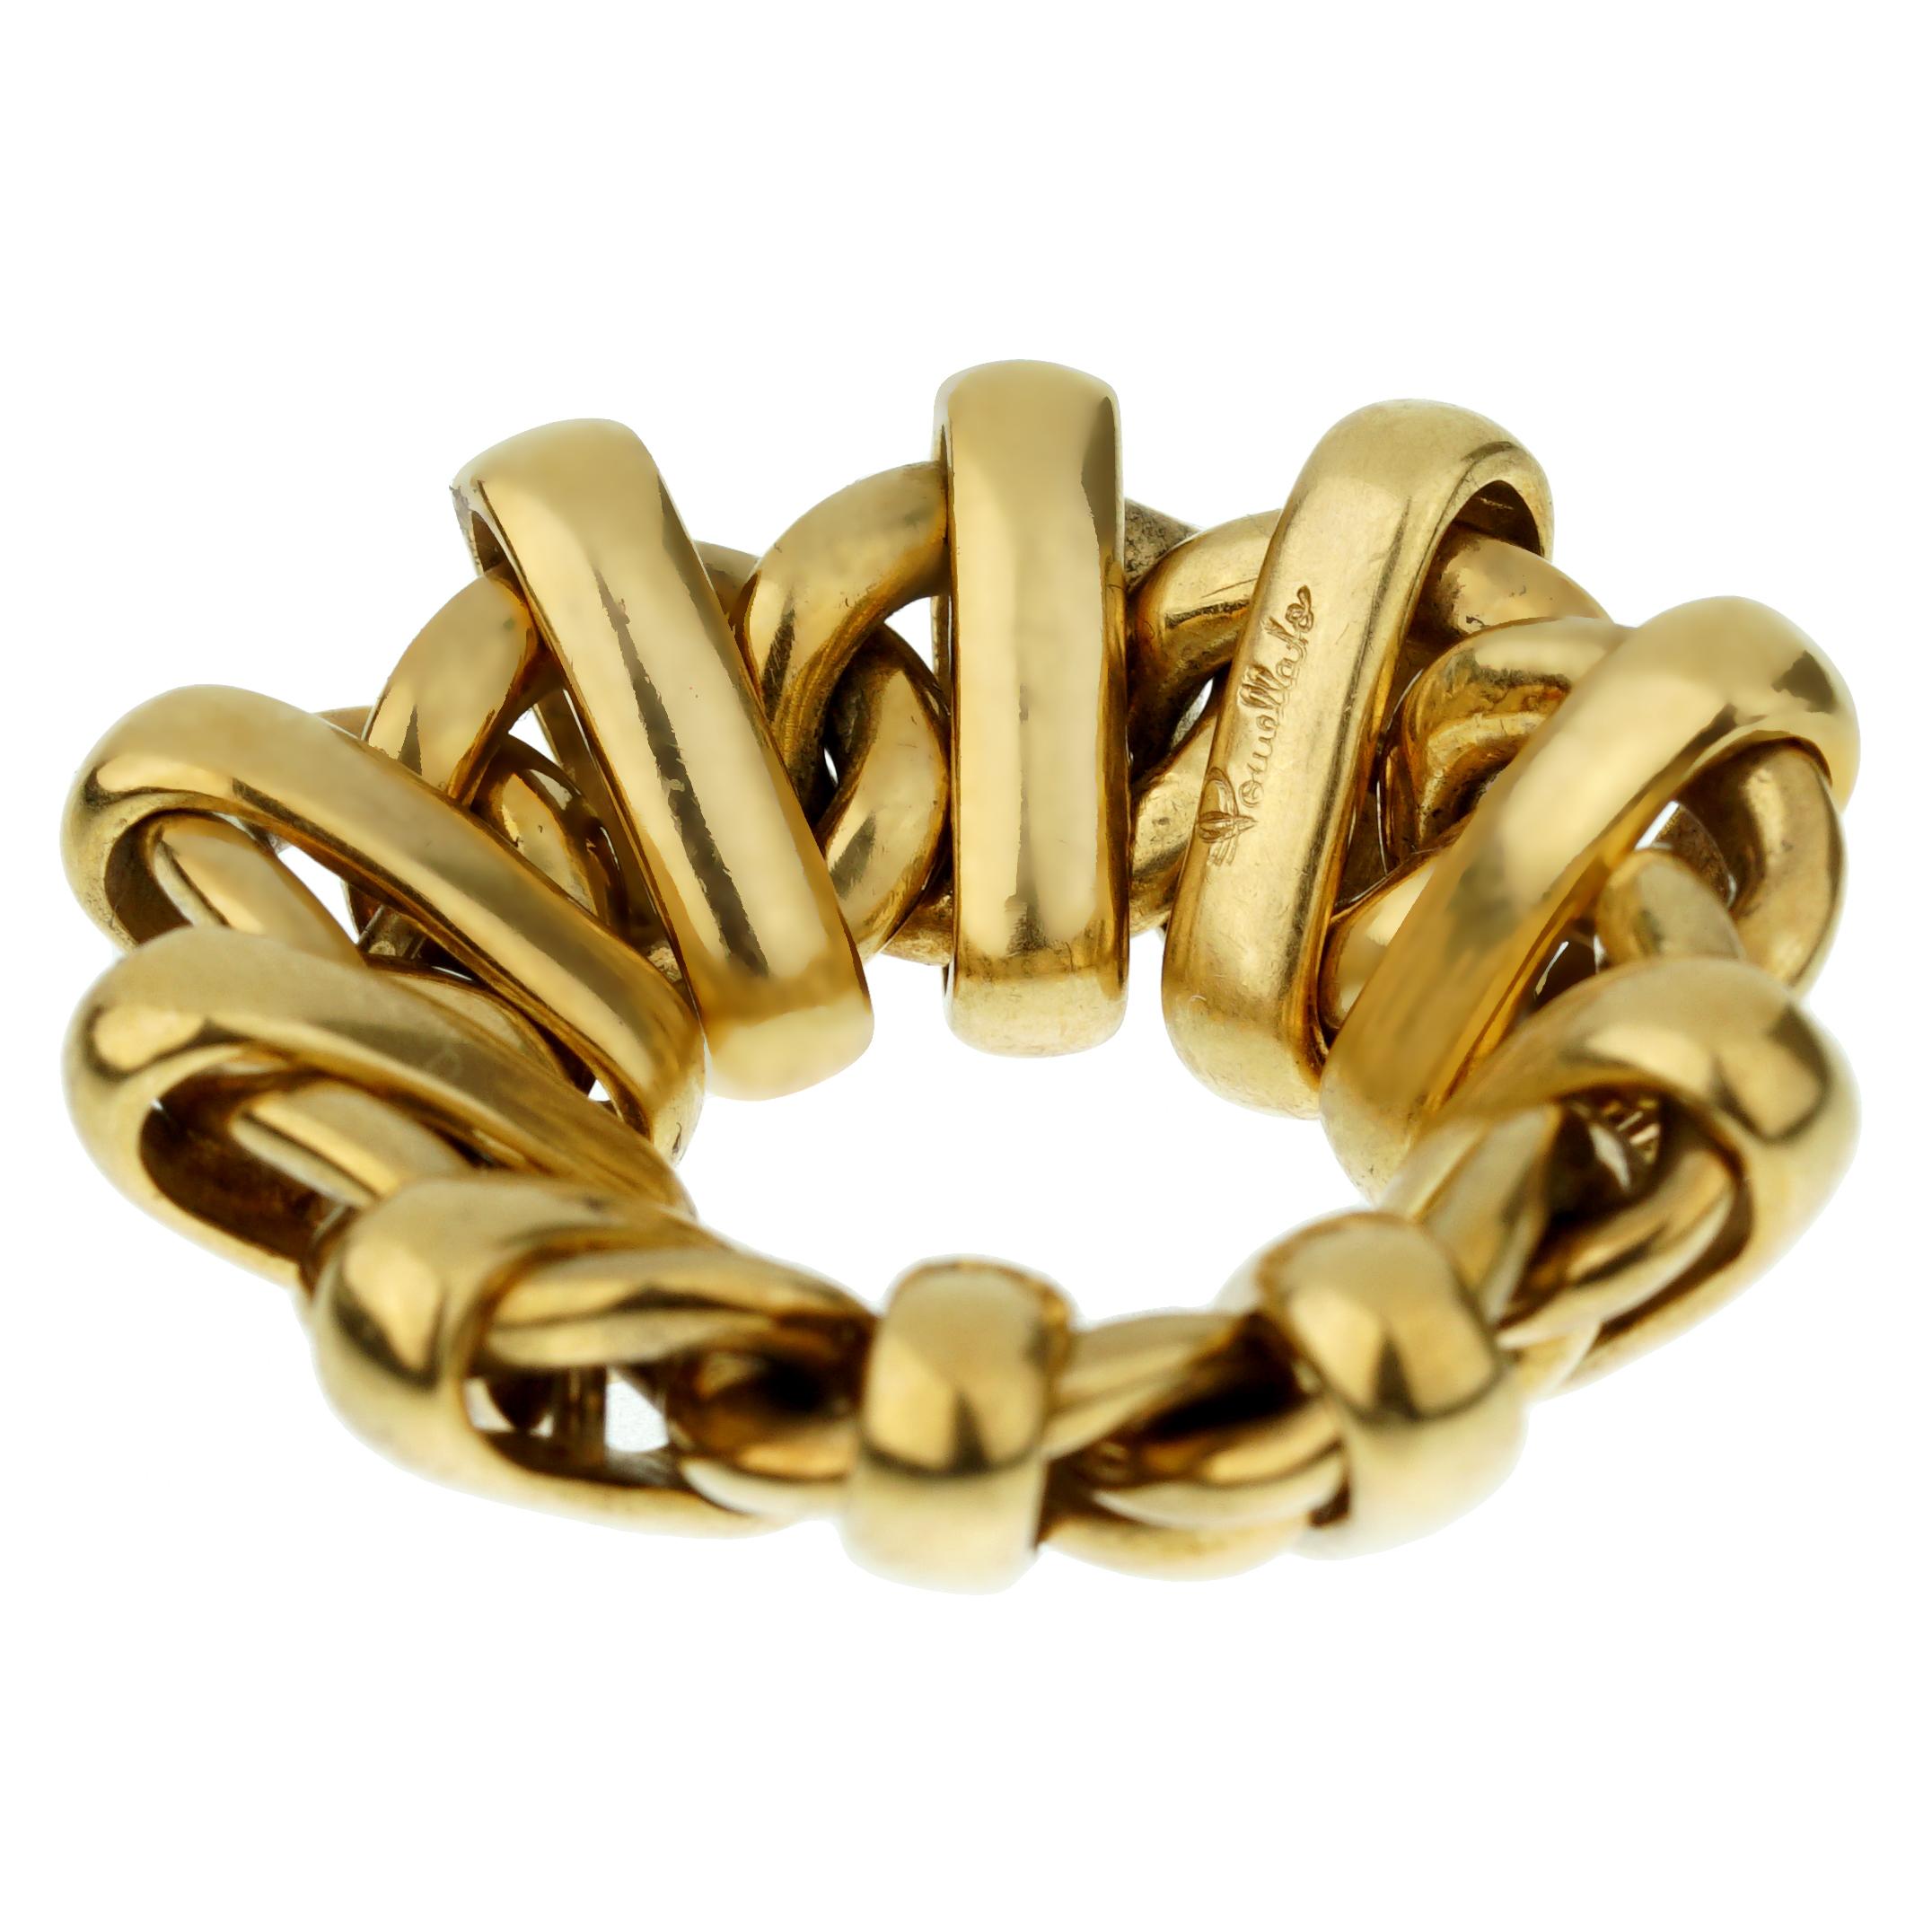 A fun collapsible vintage Pomellato ring, the ring reveals a chain link motif with bars going over each link. The ring measures a size 6 1/4 and has a weight of 20.1 grams of 18k gold.